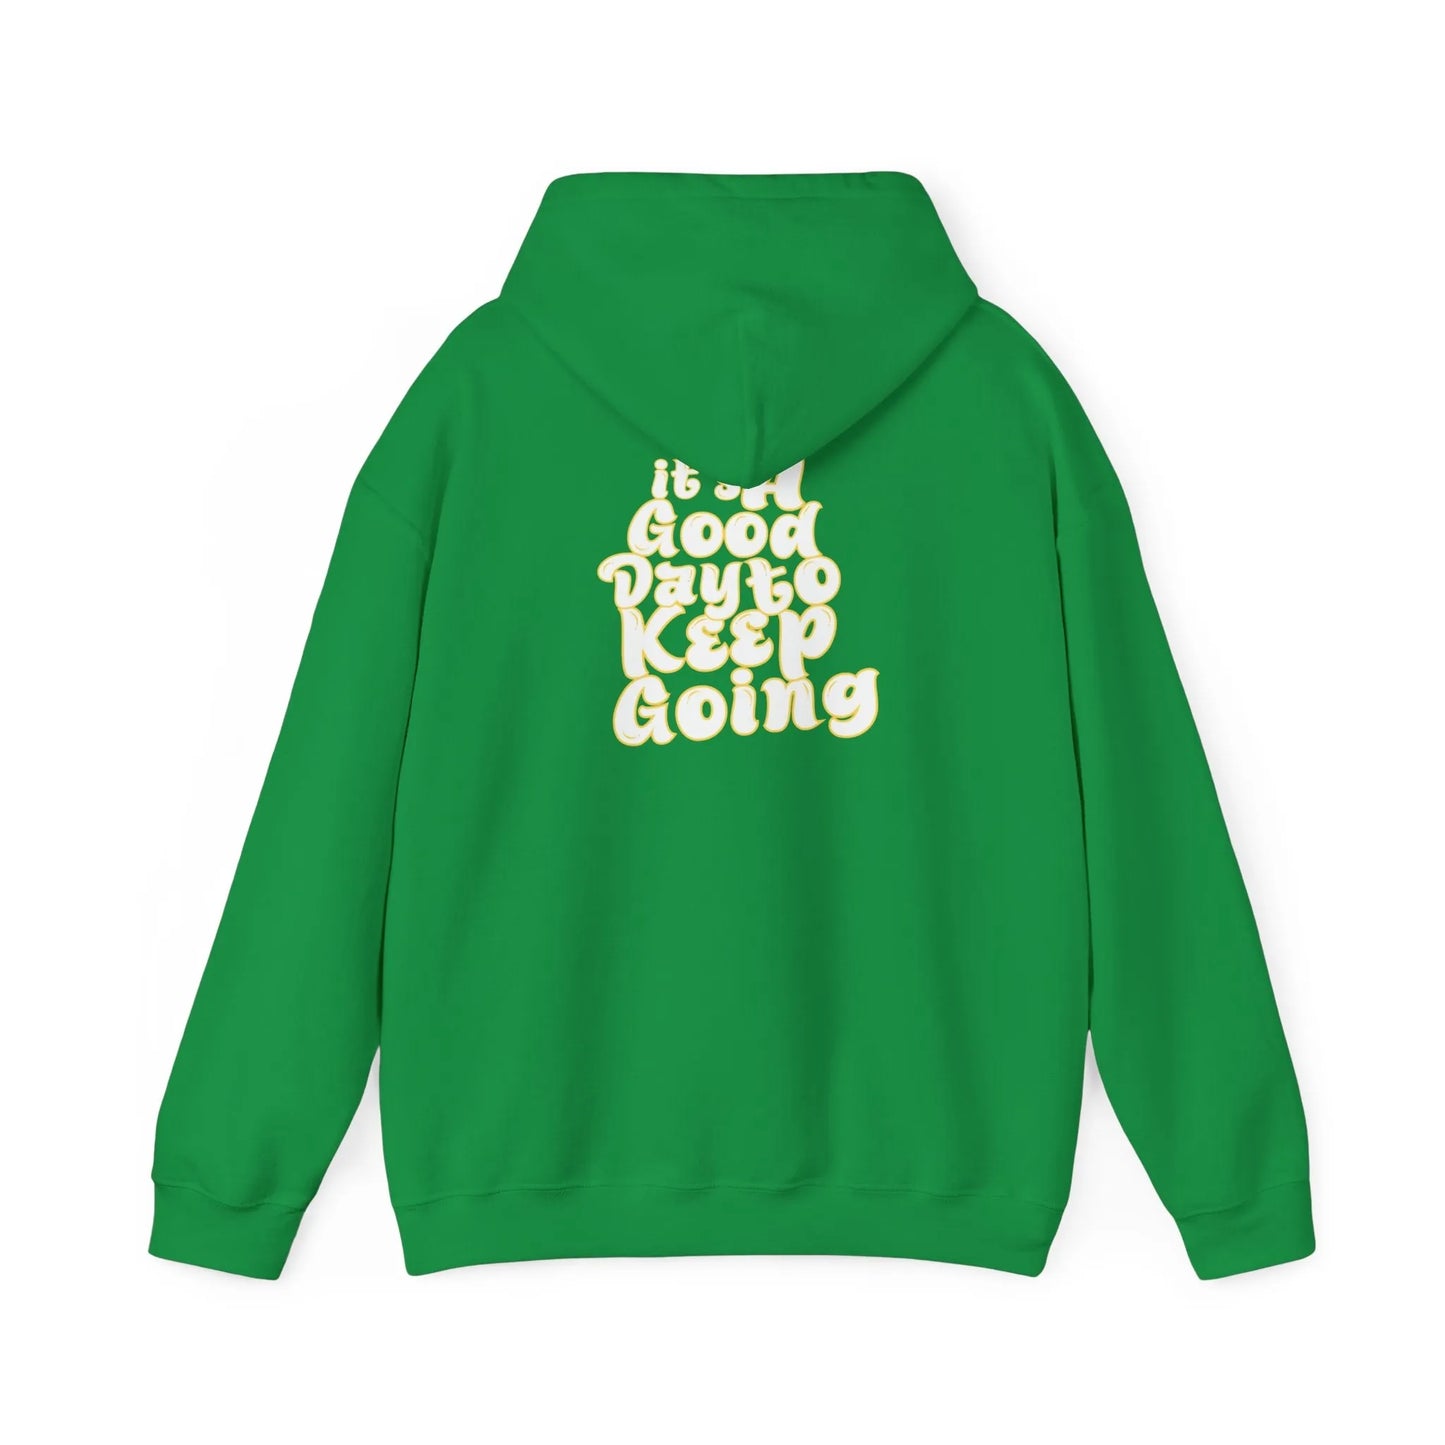 It's A Good Day To Keep Going Hoodie Yellow Green Back